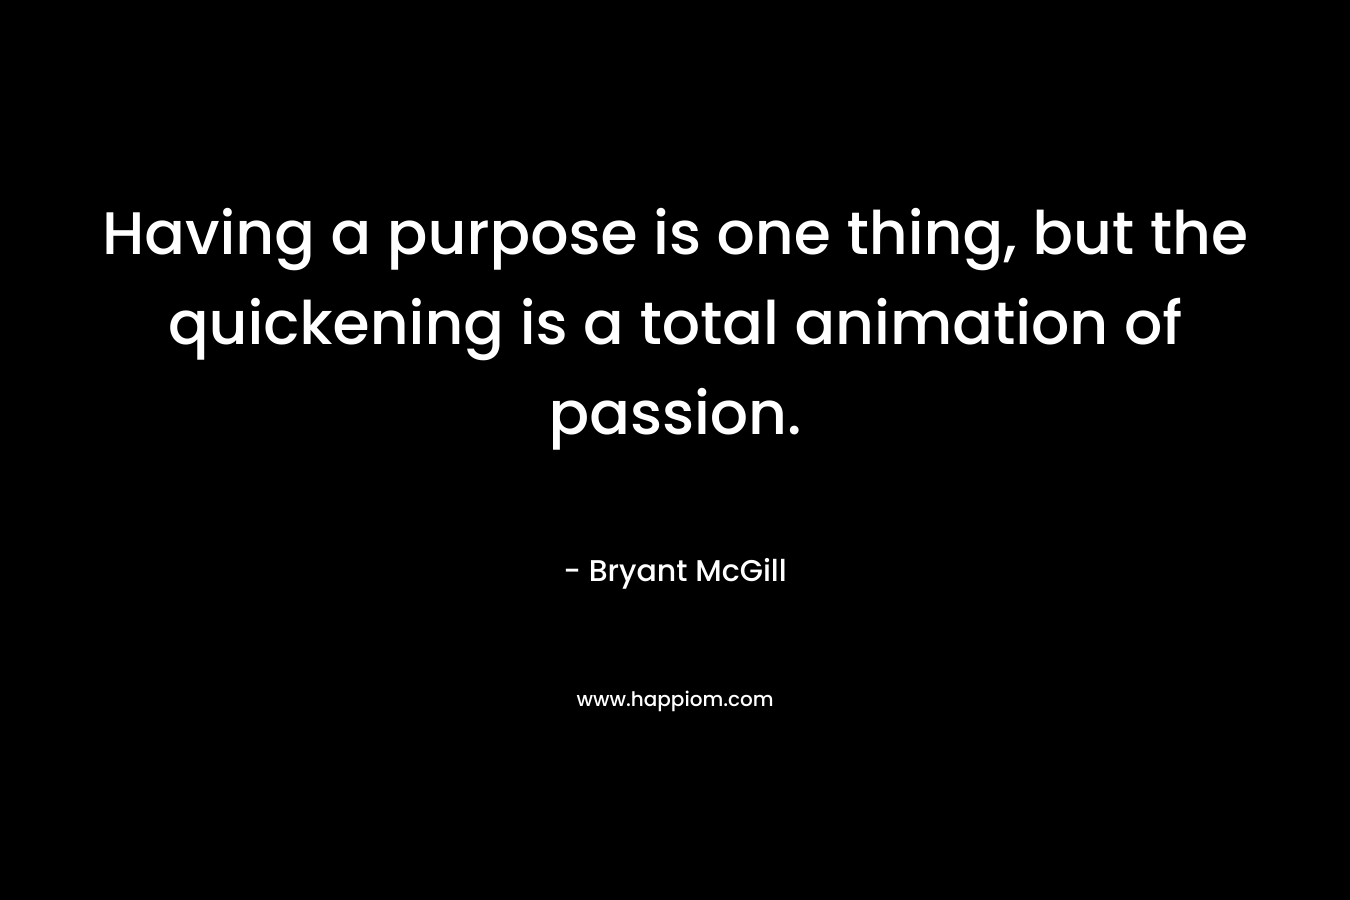 Having a purpose is one thing, but the quickening is a total animation of passion. – Bryant McGill